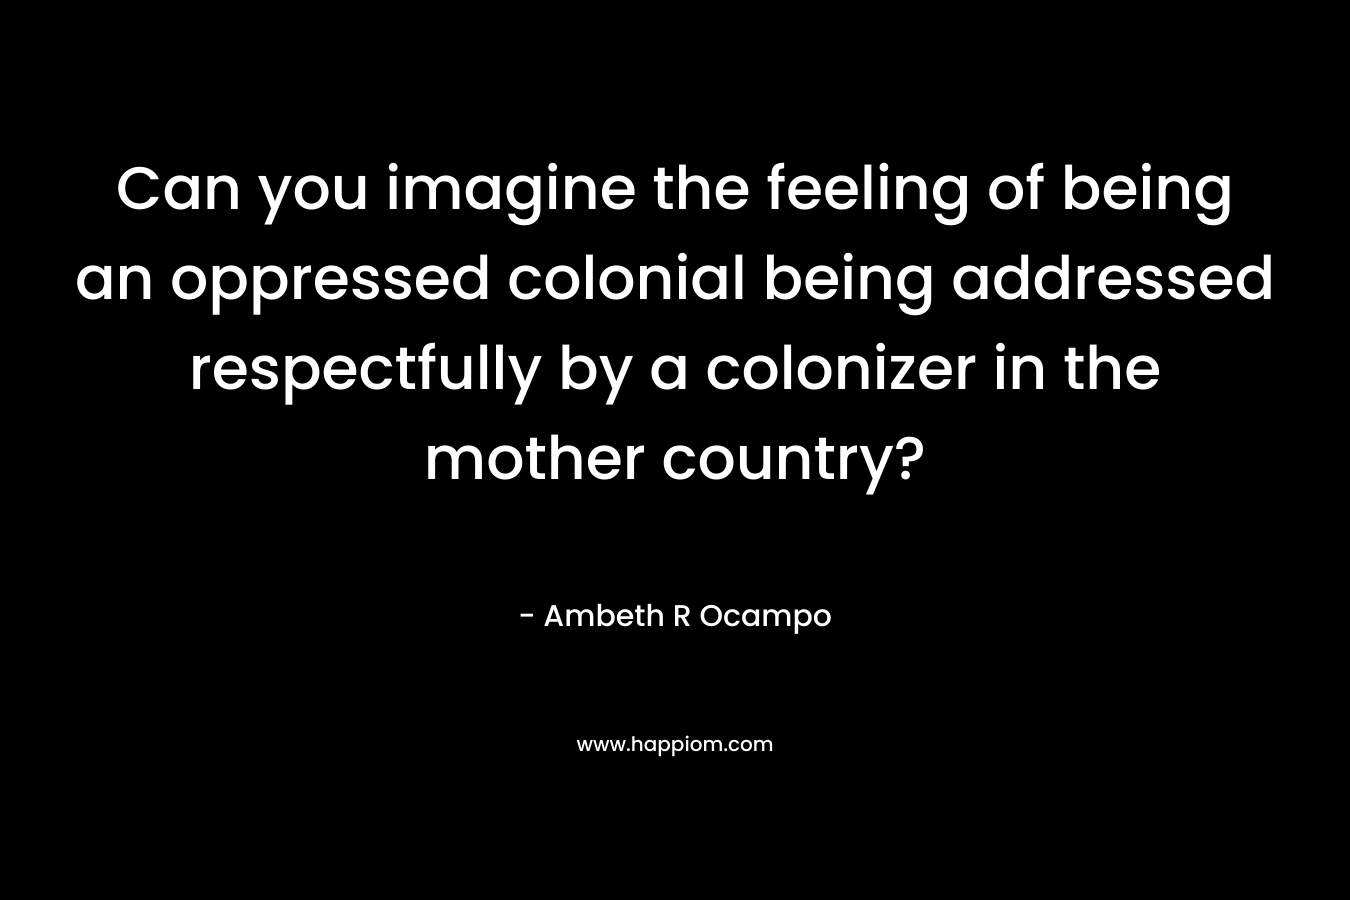 Can you imagine the feeling of being an oppressed colonial being addressed respectfully by a colonizer in the mother country? – Ambeth R Ocampo